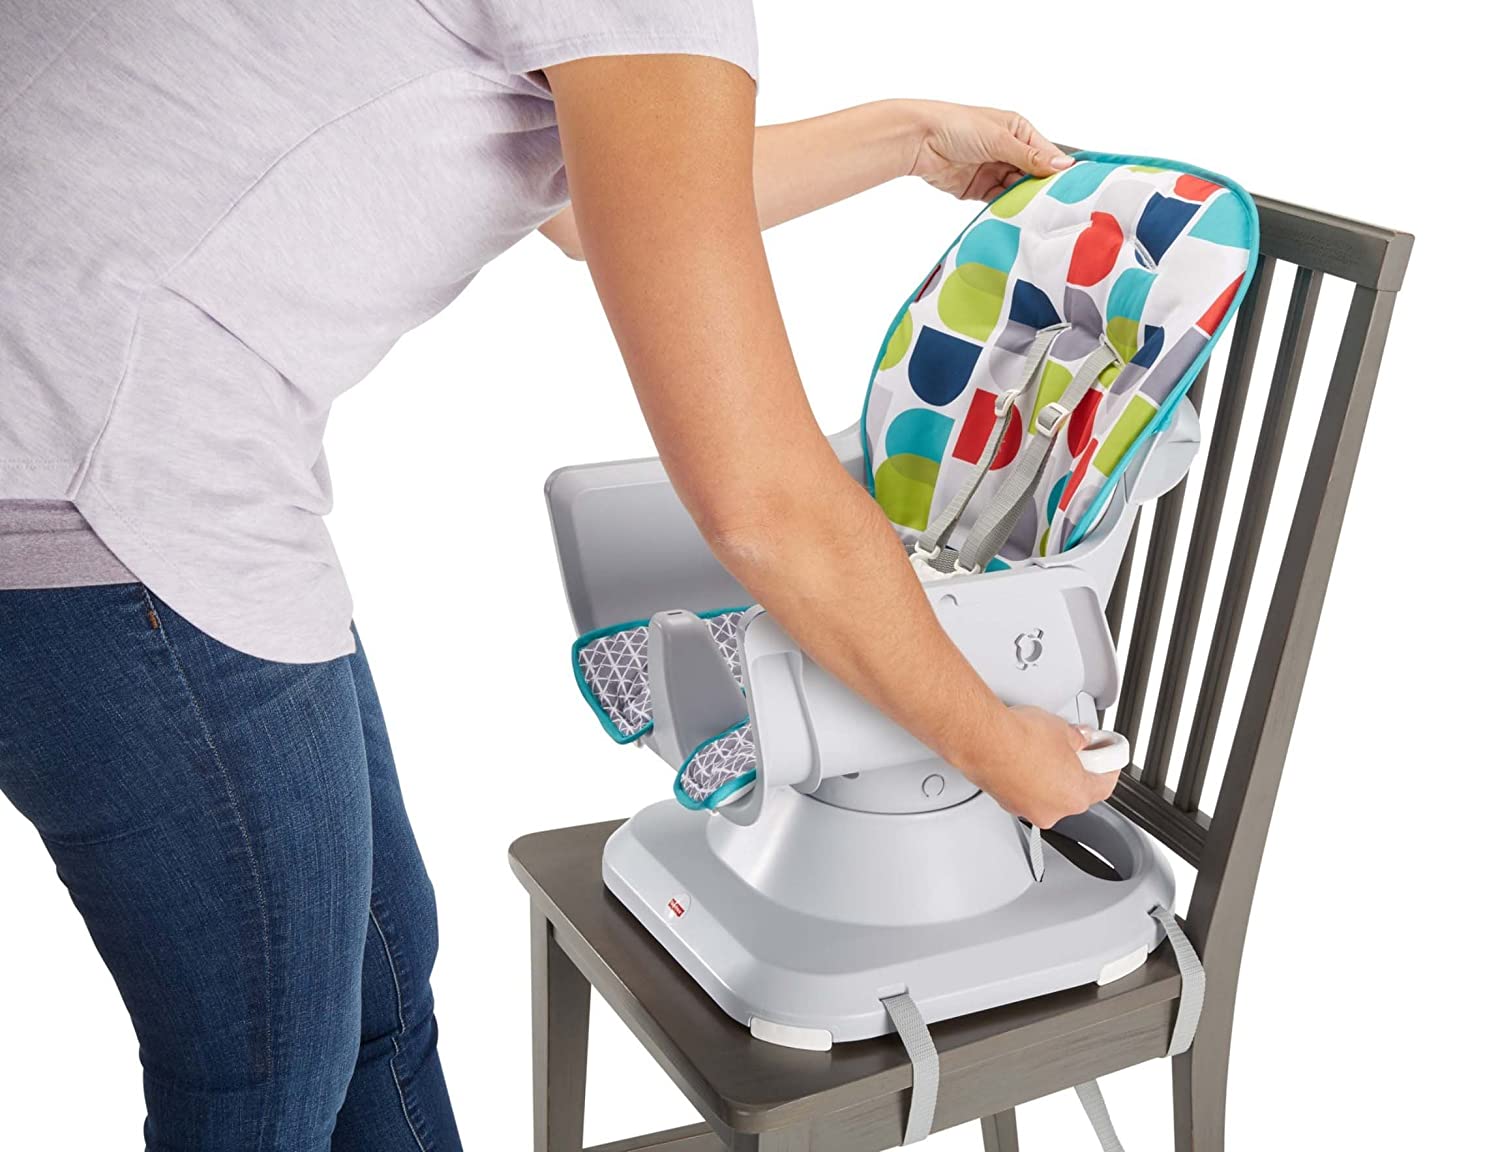 Fisher-Price SpaceSaver High Chair, Color Climbers (Eco Friendly Packaging) - with 2 height adjustments & 3 recline positions